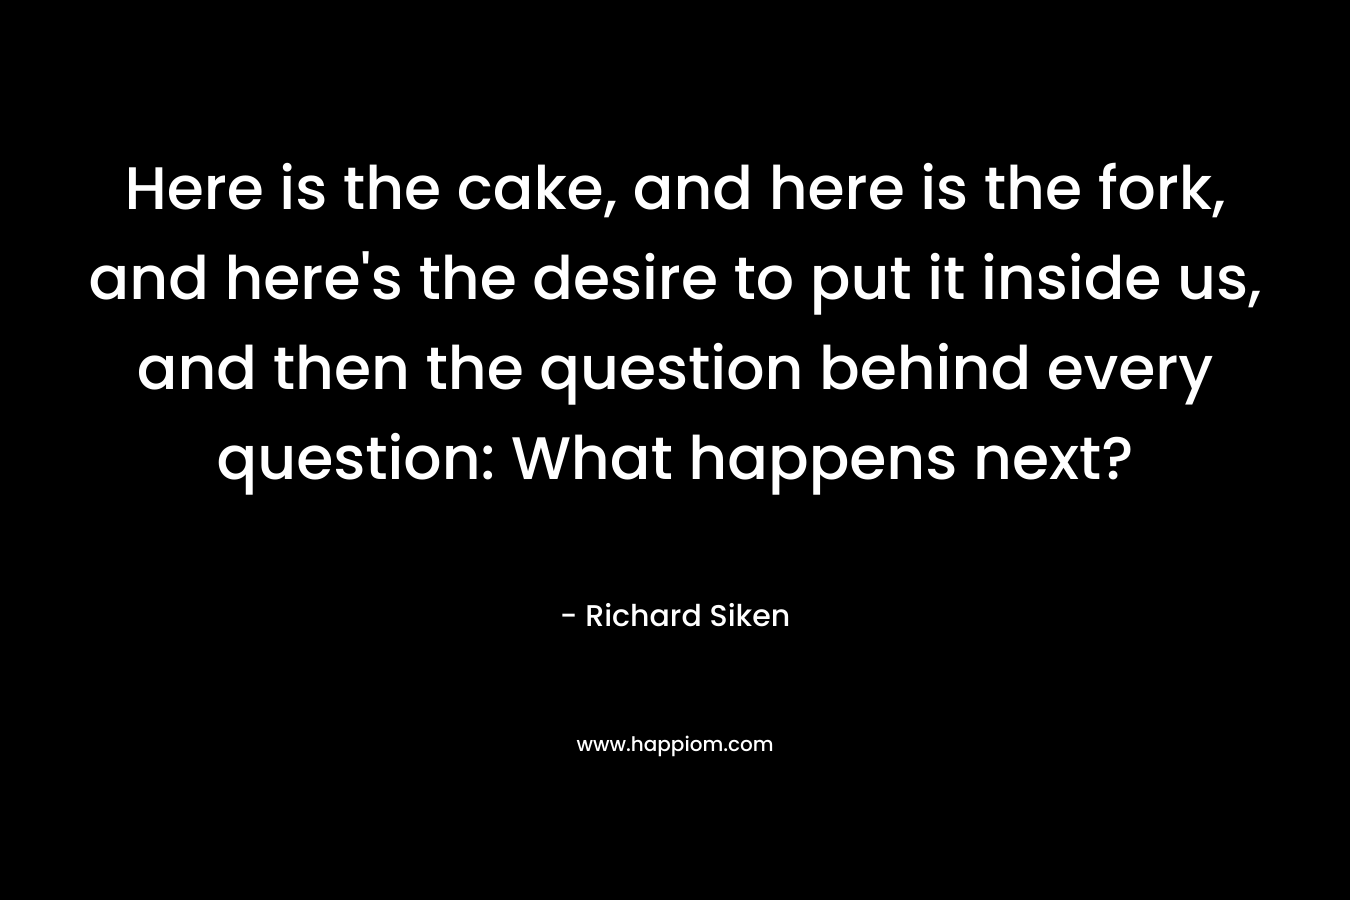 Here is the cake, and here is the fork, and here's the desire to put it inside us, and then the question behind every question: What happens next?